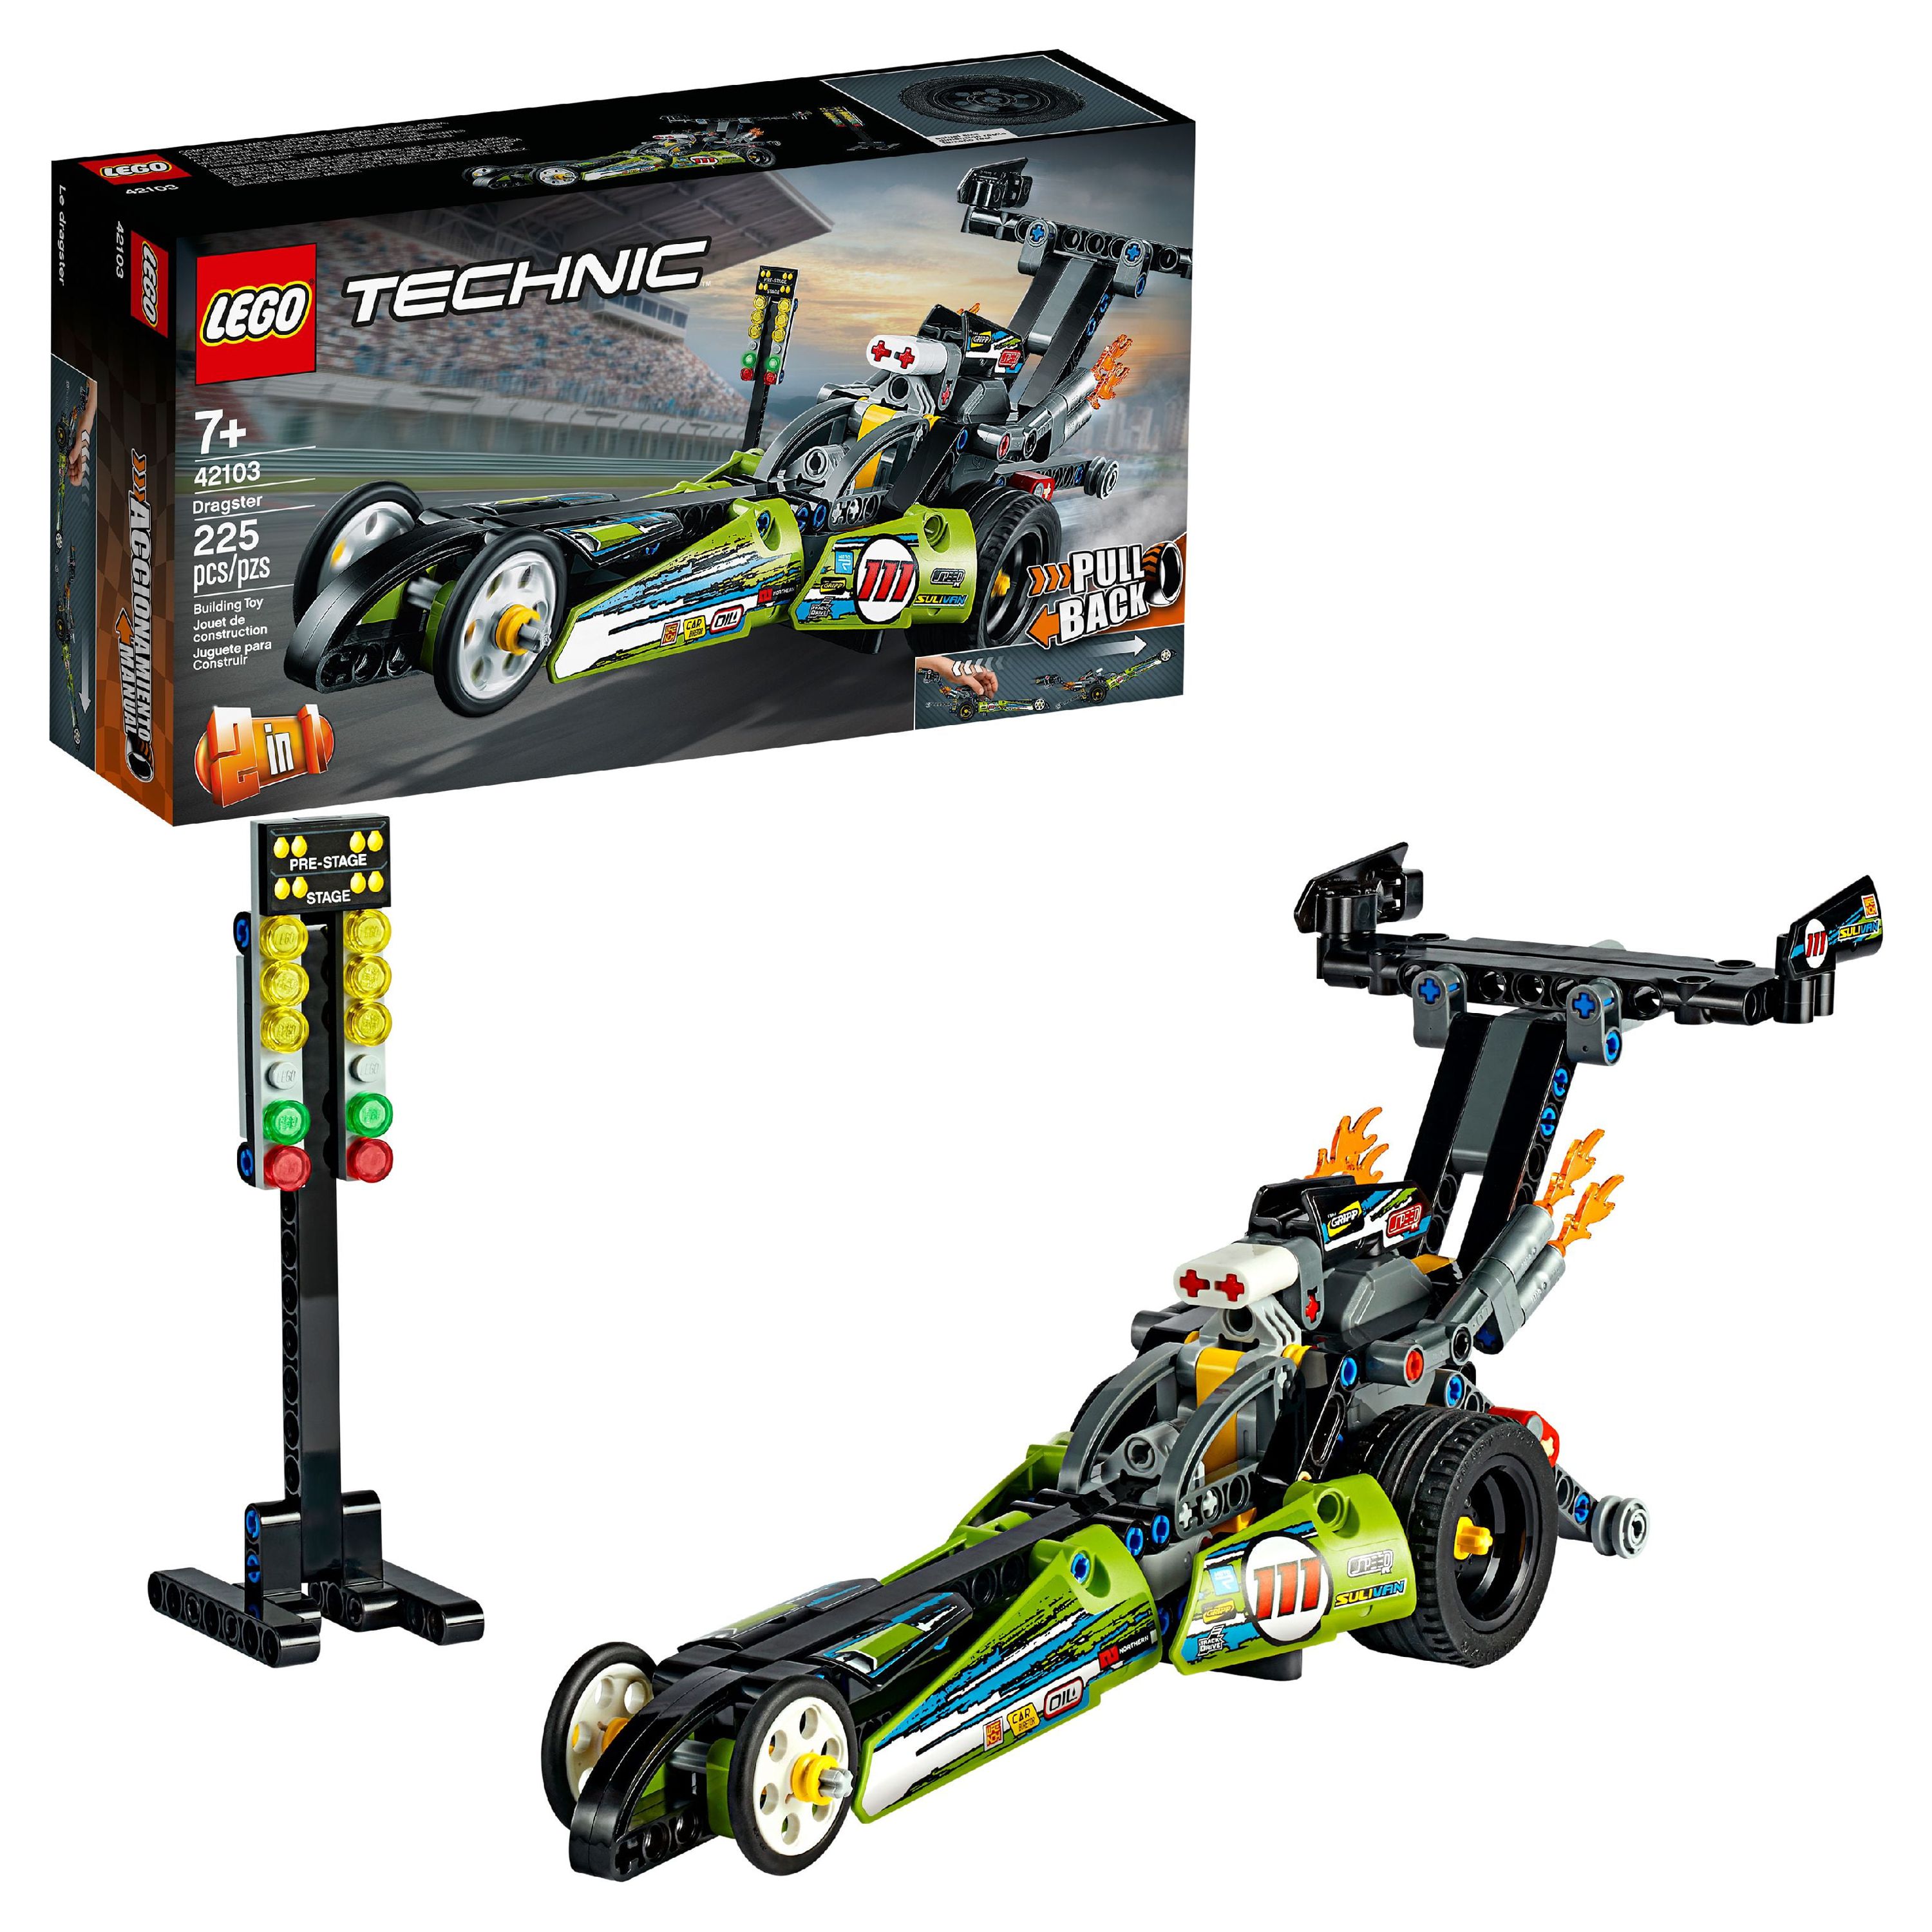 LEGO Technic Dragster 42103 Pull-Back Racing Toy Building Kit (225 pieces) - image 1 of 7